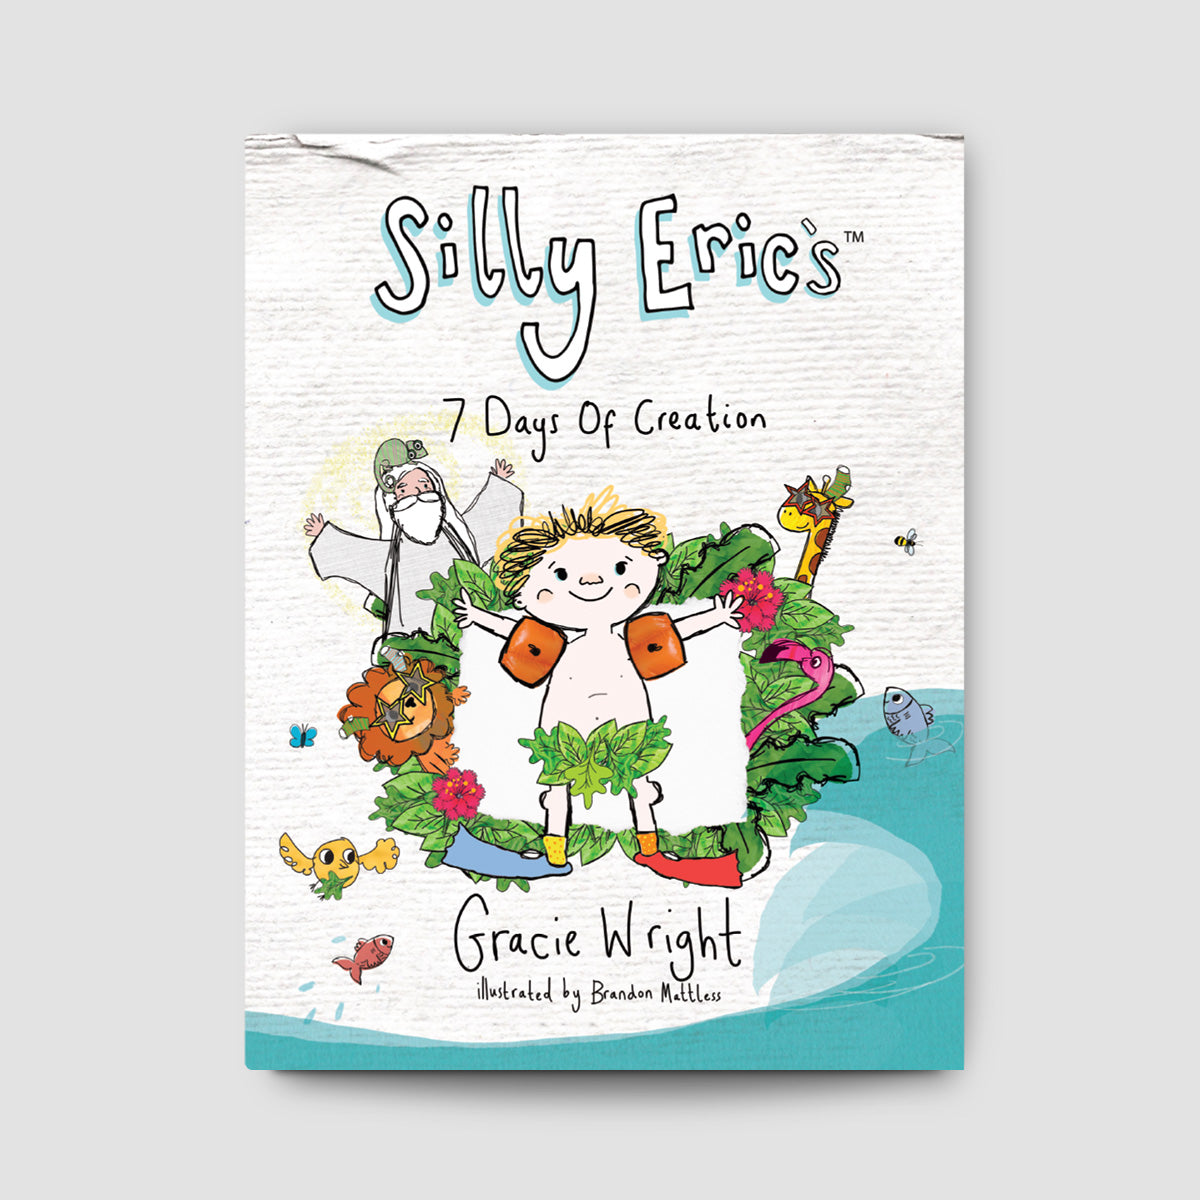 Silly Eric's 7 Days of Creation Storybook